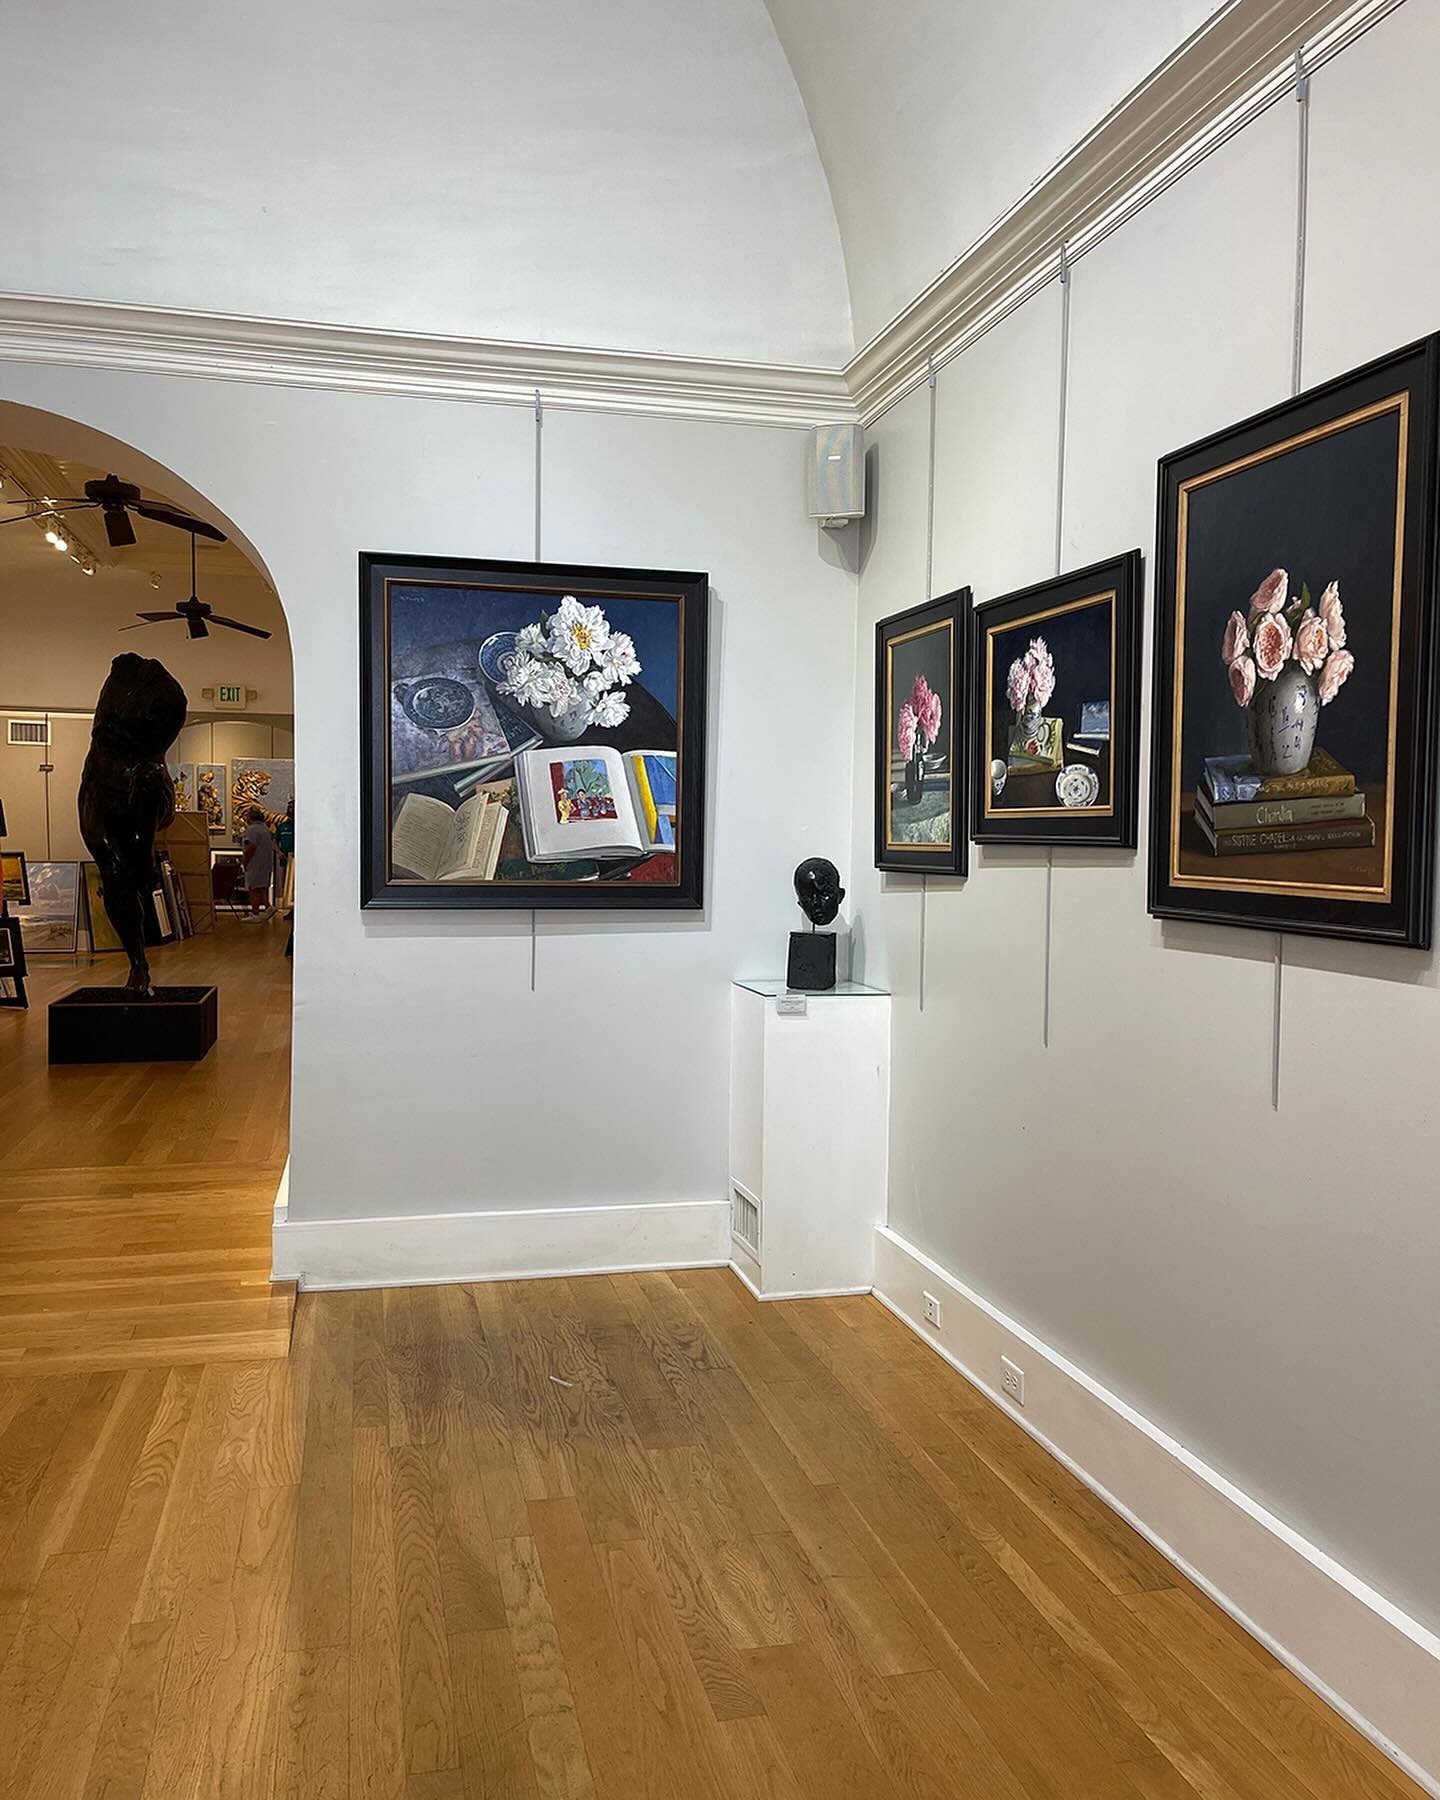 Install photo of MEMORIES in BLOOM my solo exhibition at&nbsp;@principle_charleston which opens tomorrow!⁠
⁠
Artist Talk on Saturday, May 4th at 11:30am⁠
⁠
Catalog available by emailing art@principlecharleston.com 

#memoriesinbloom #memoriesinbloome